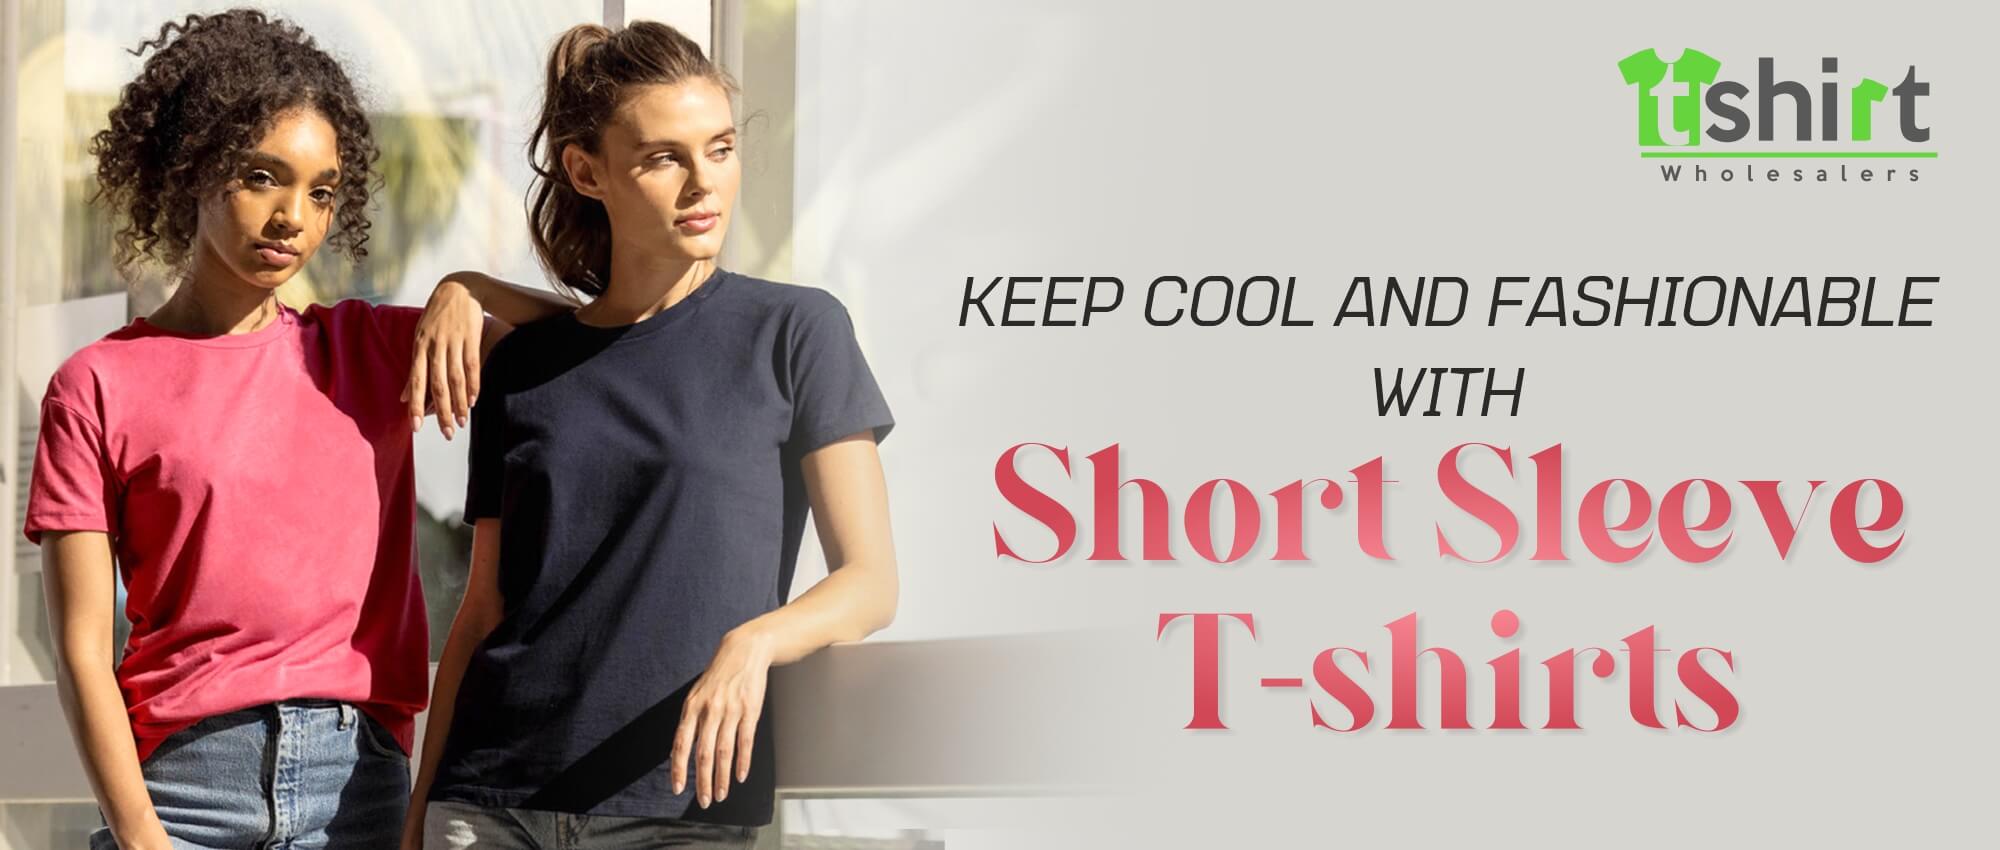 KEEP COOL AND FASHIONABLE WITH SHORT SLEEVE T-SHIRTS